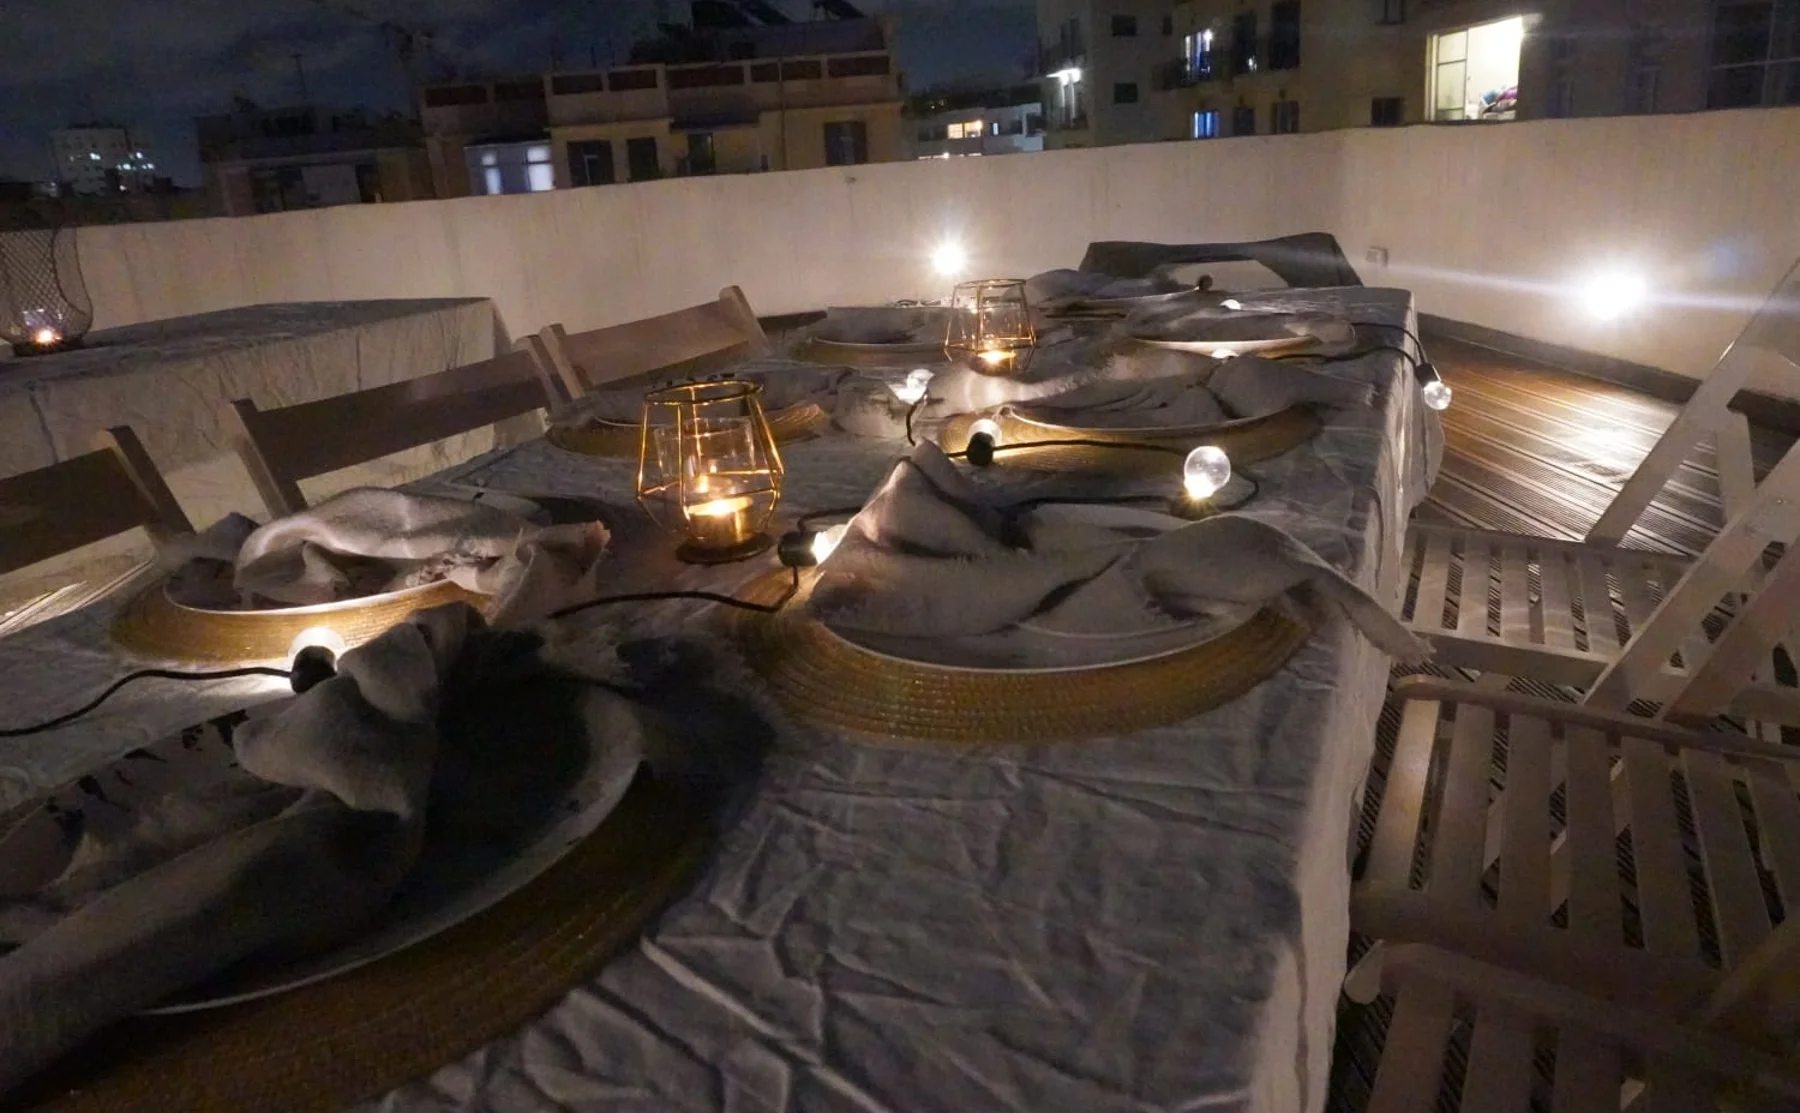 Meat dinner on a Jaffa roof  - 1509548